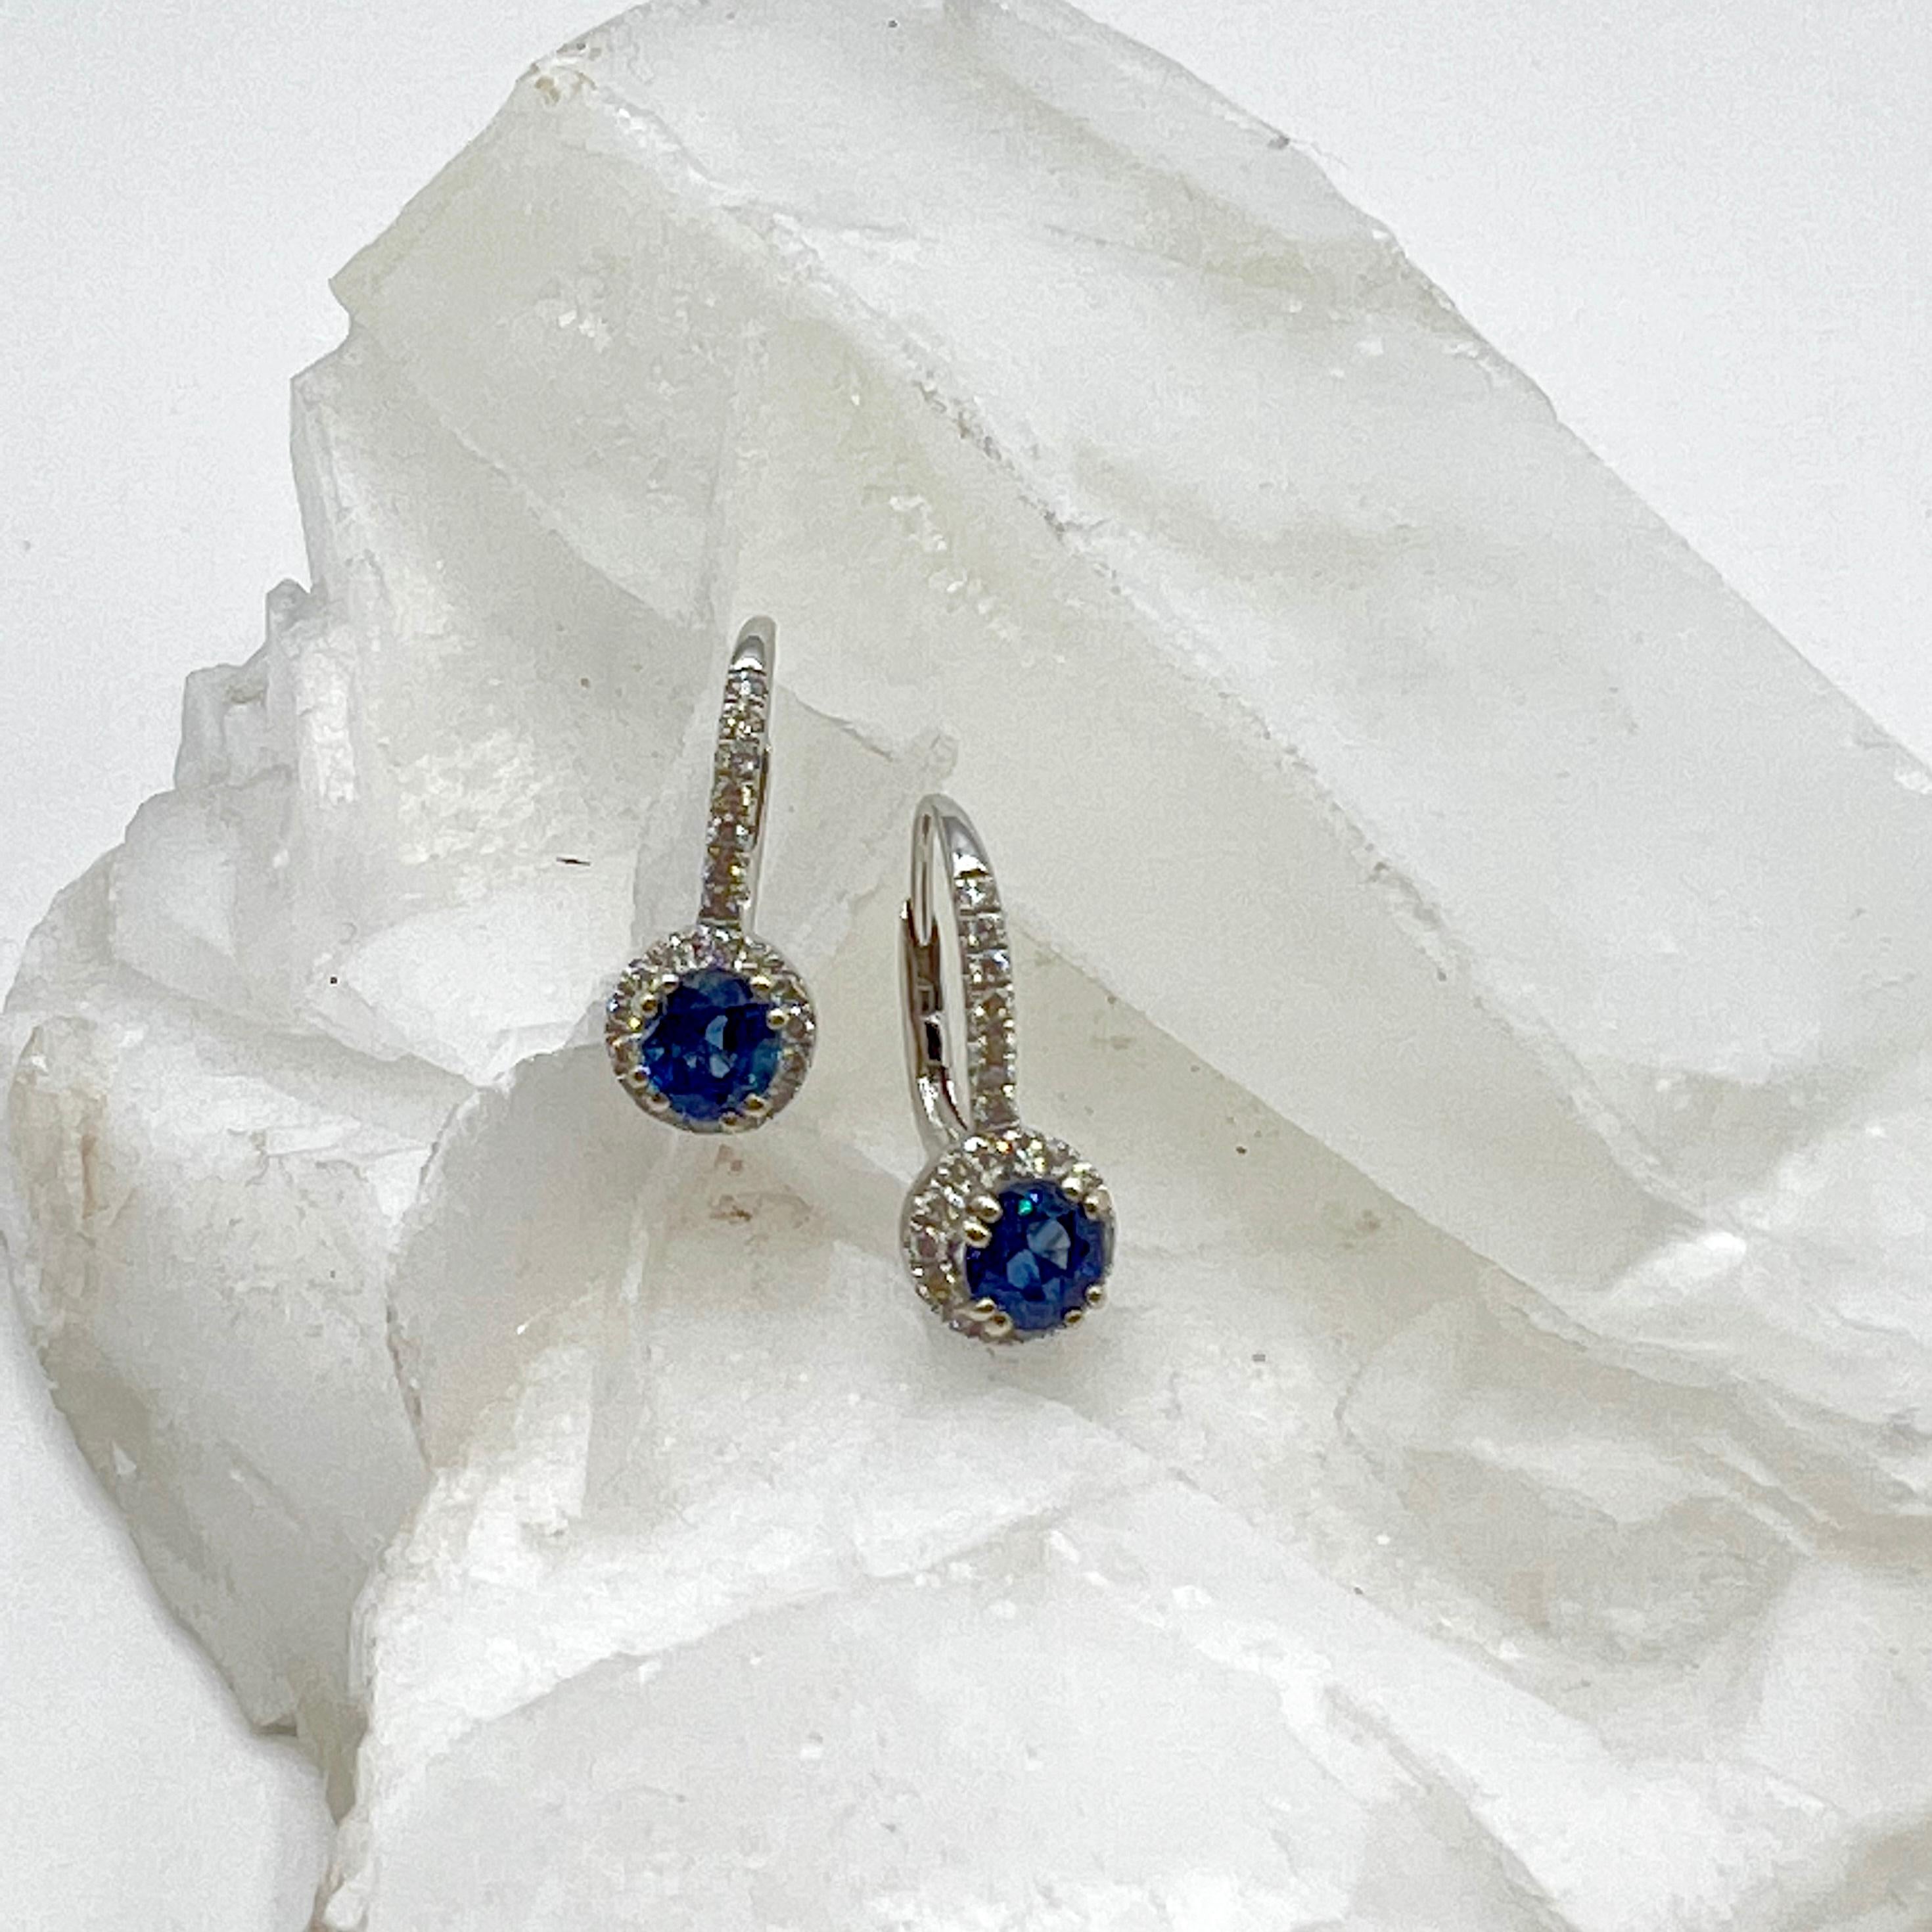 These stunners have deep blue round  natural sapphires with a total carat weight of 1.15. The surrounding bright white natural diamonds are a total carat weight of 0.34 to create a beautiful contrast. The leaver backs have diamonds vertically for a